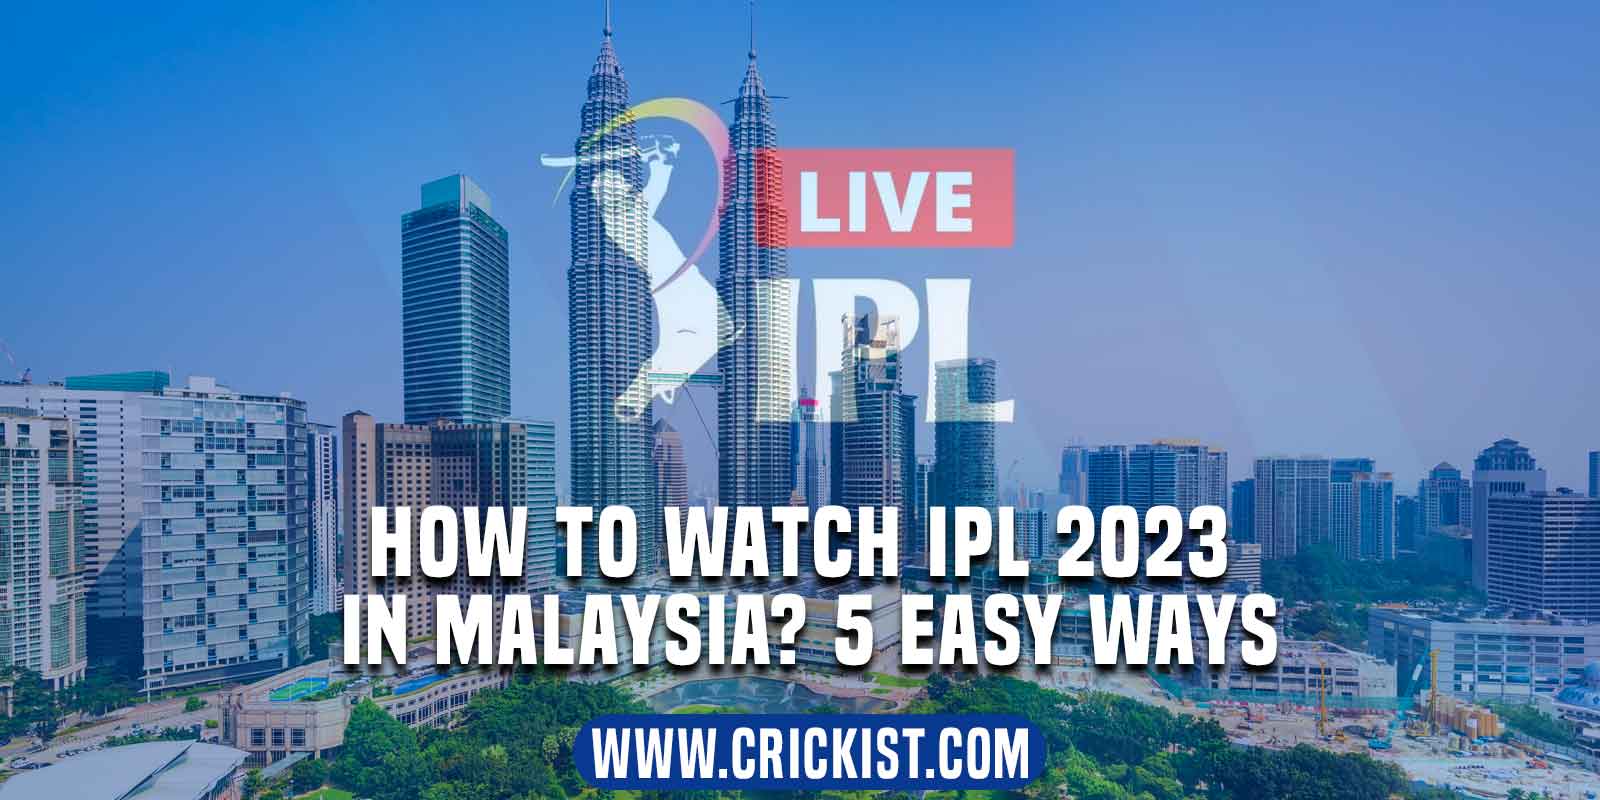 How To Watch IPL 2023 in Malaysia? 5 Easy Ways